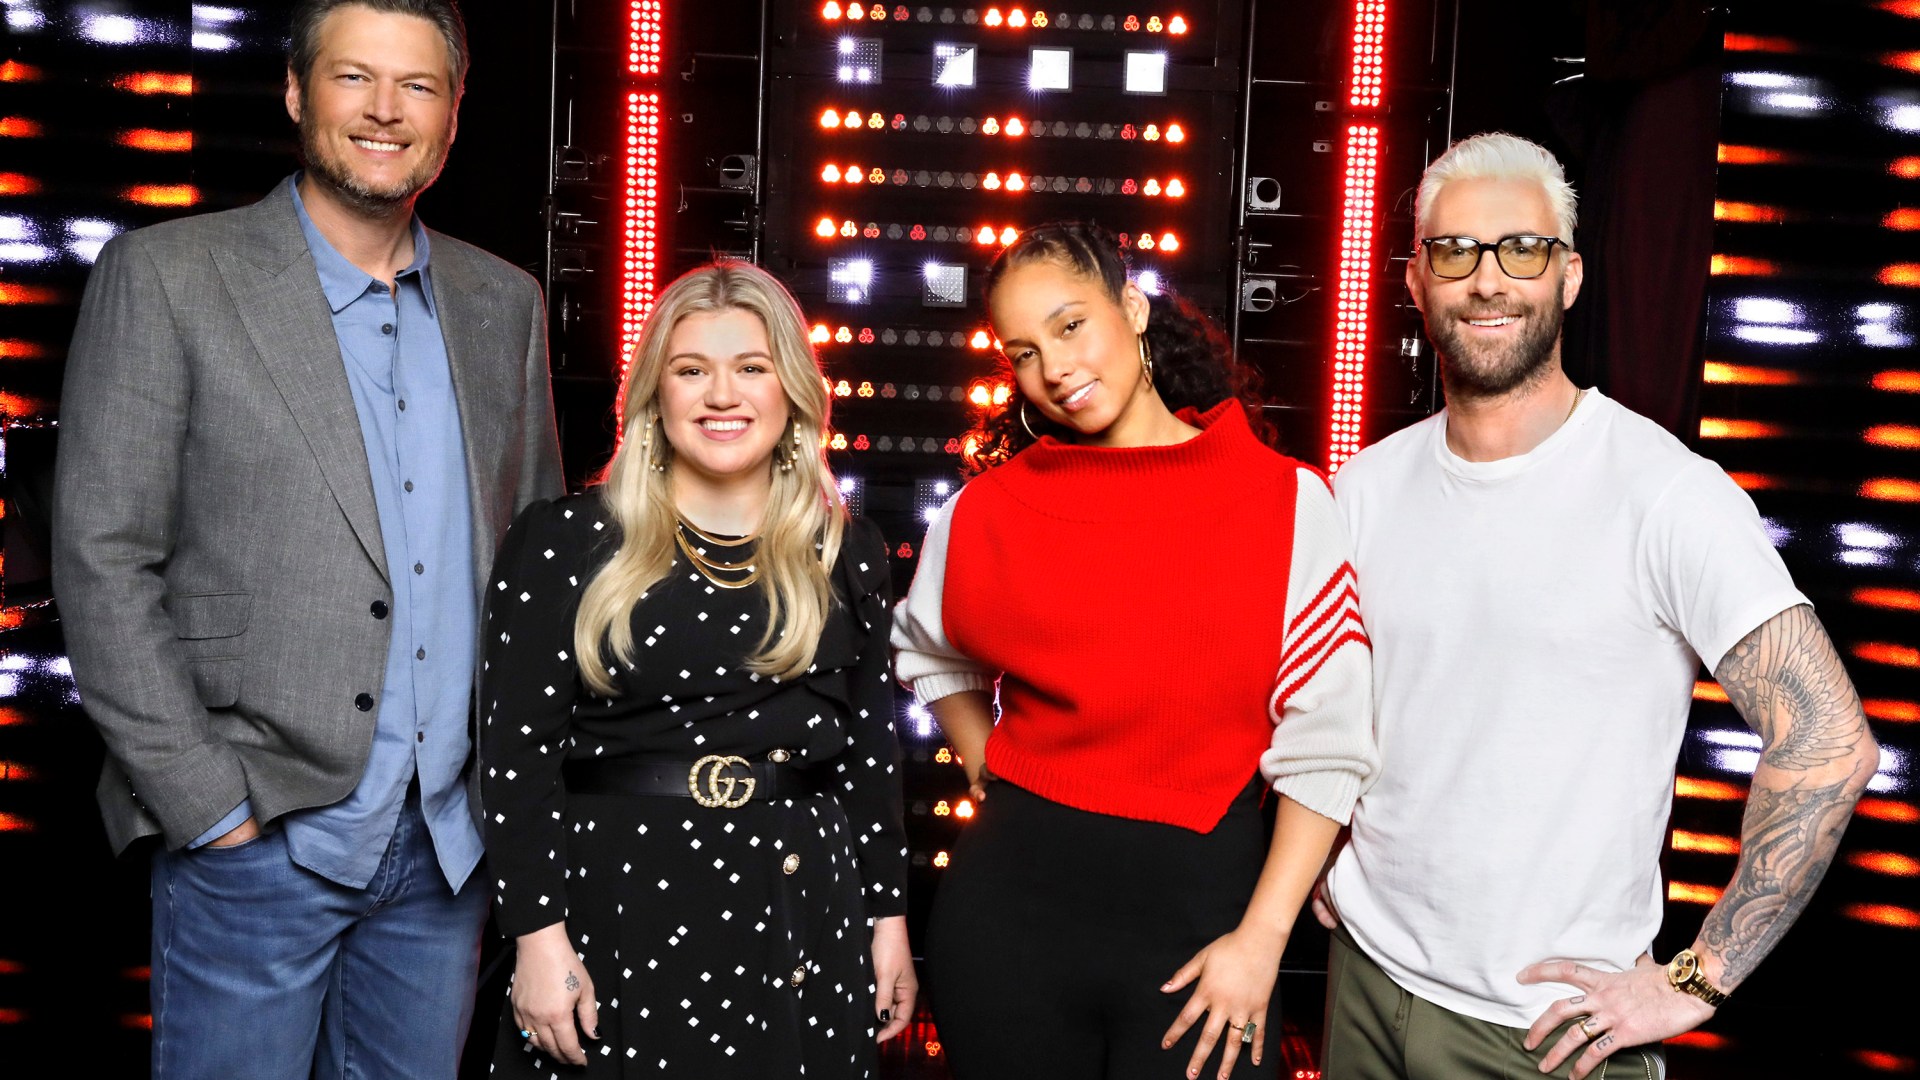 The Voice contestants young daughter nearly steals the 